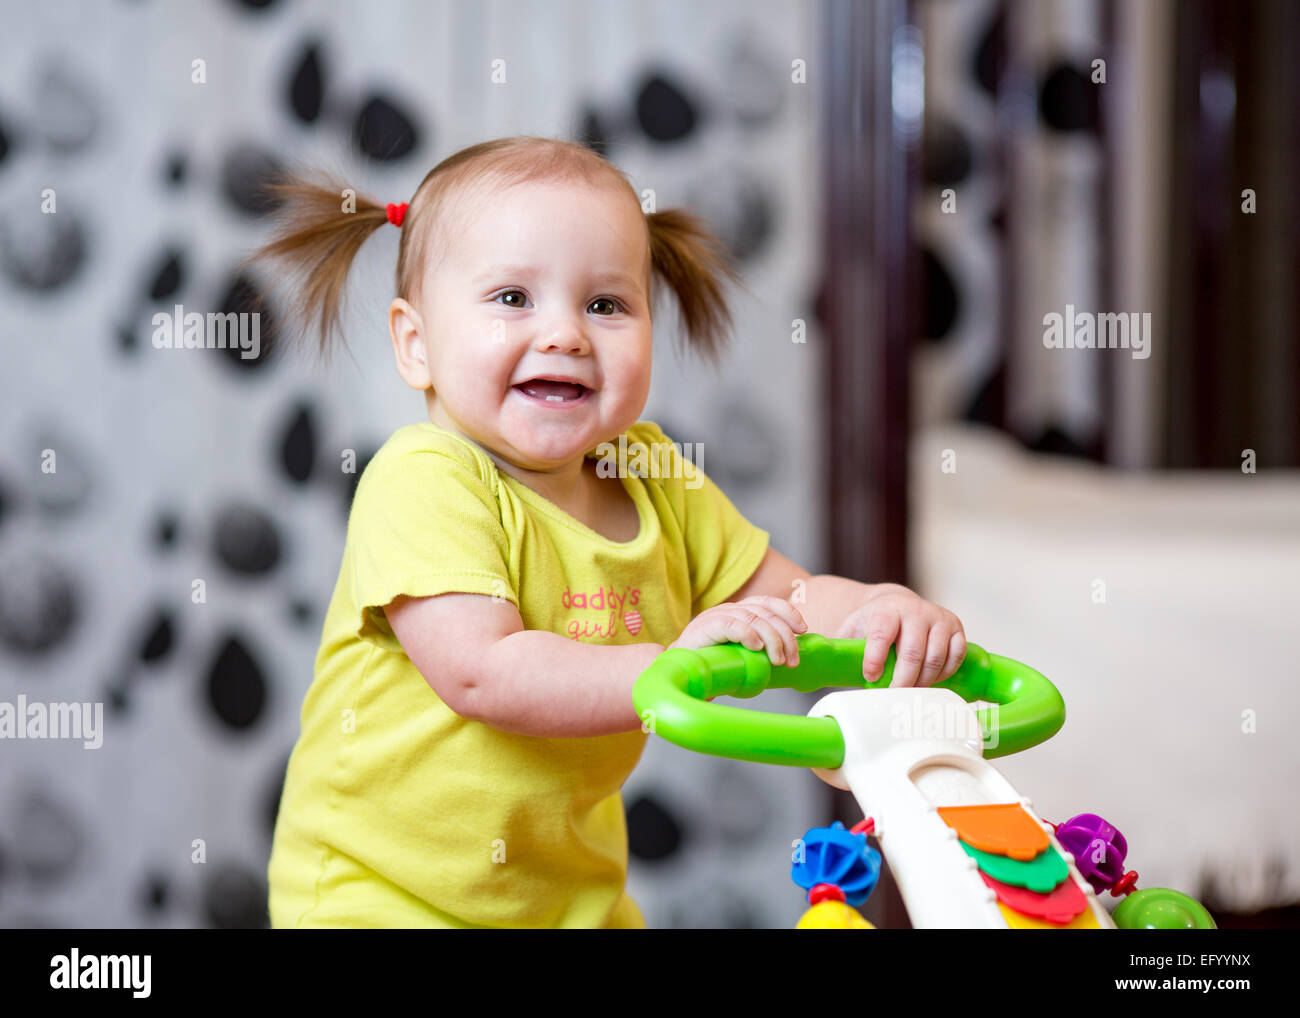 Cute toddler baby standing with support Stock Photo